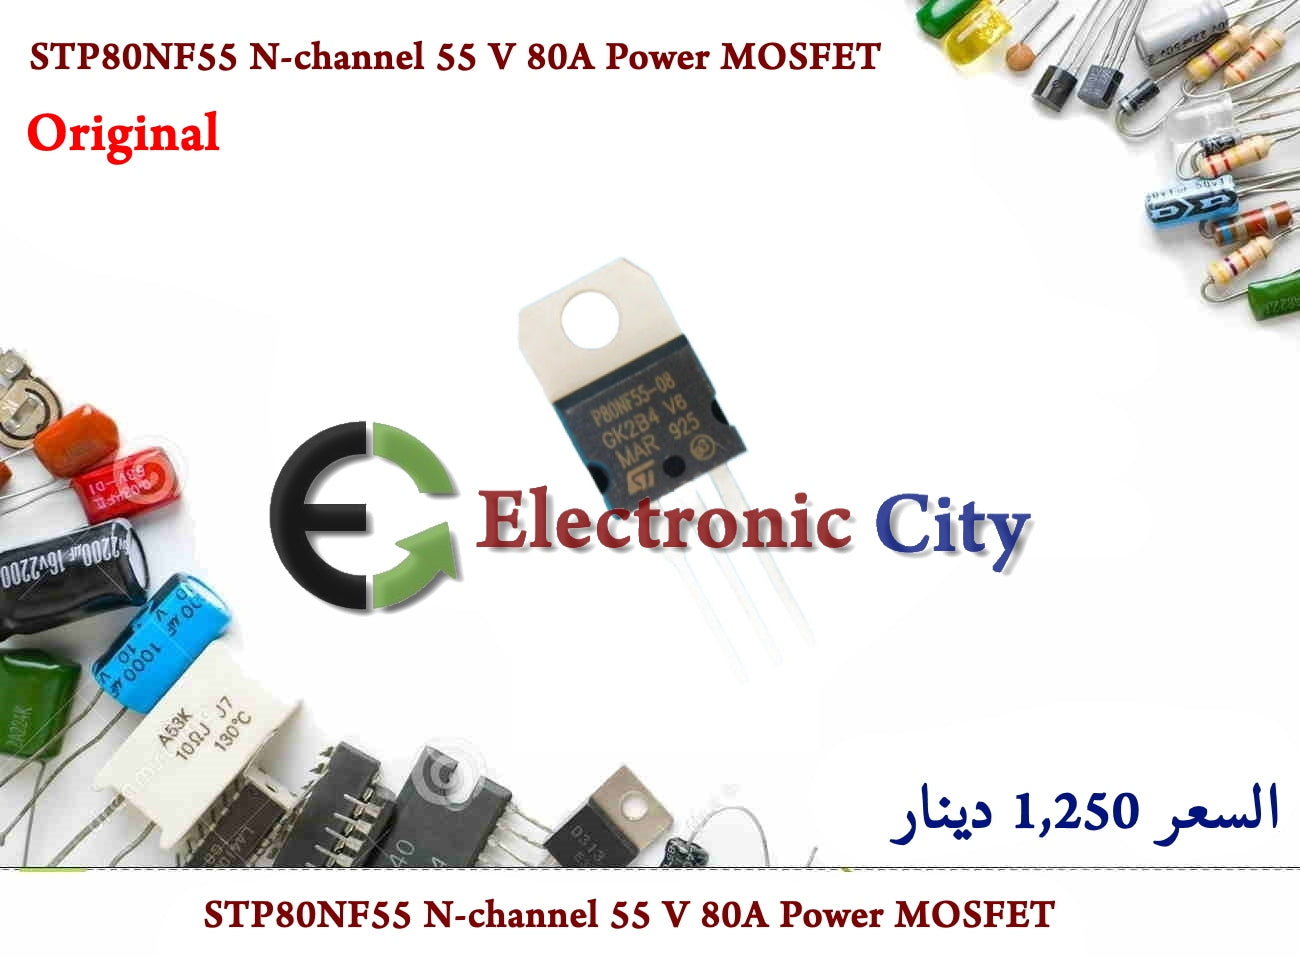 STP80NF55 N-channel 55 V 80A Power MOSFET